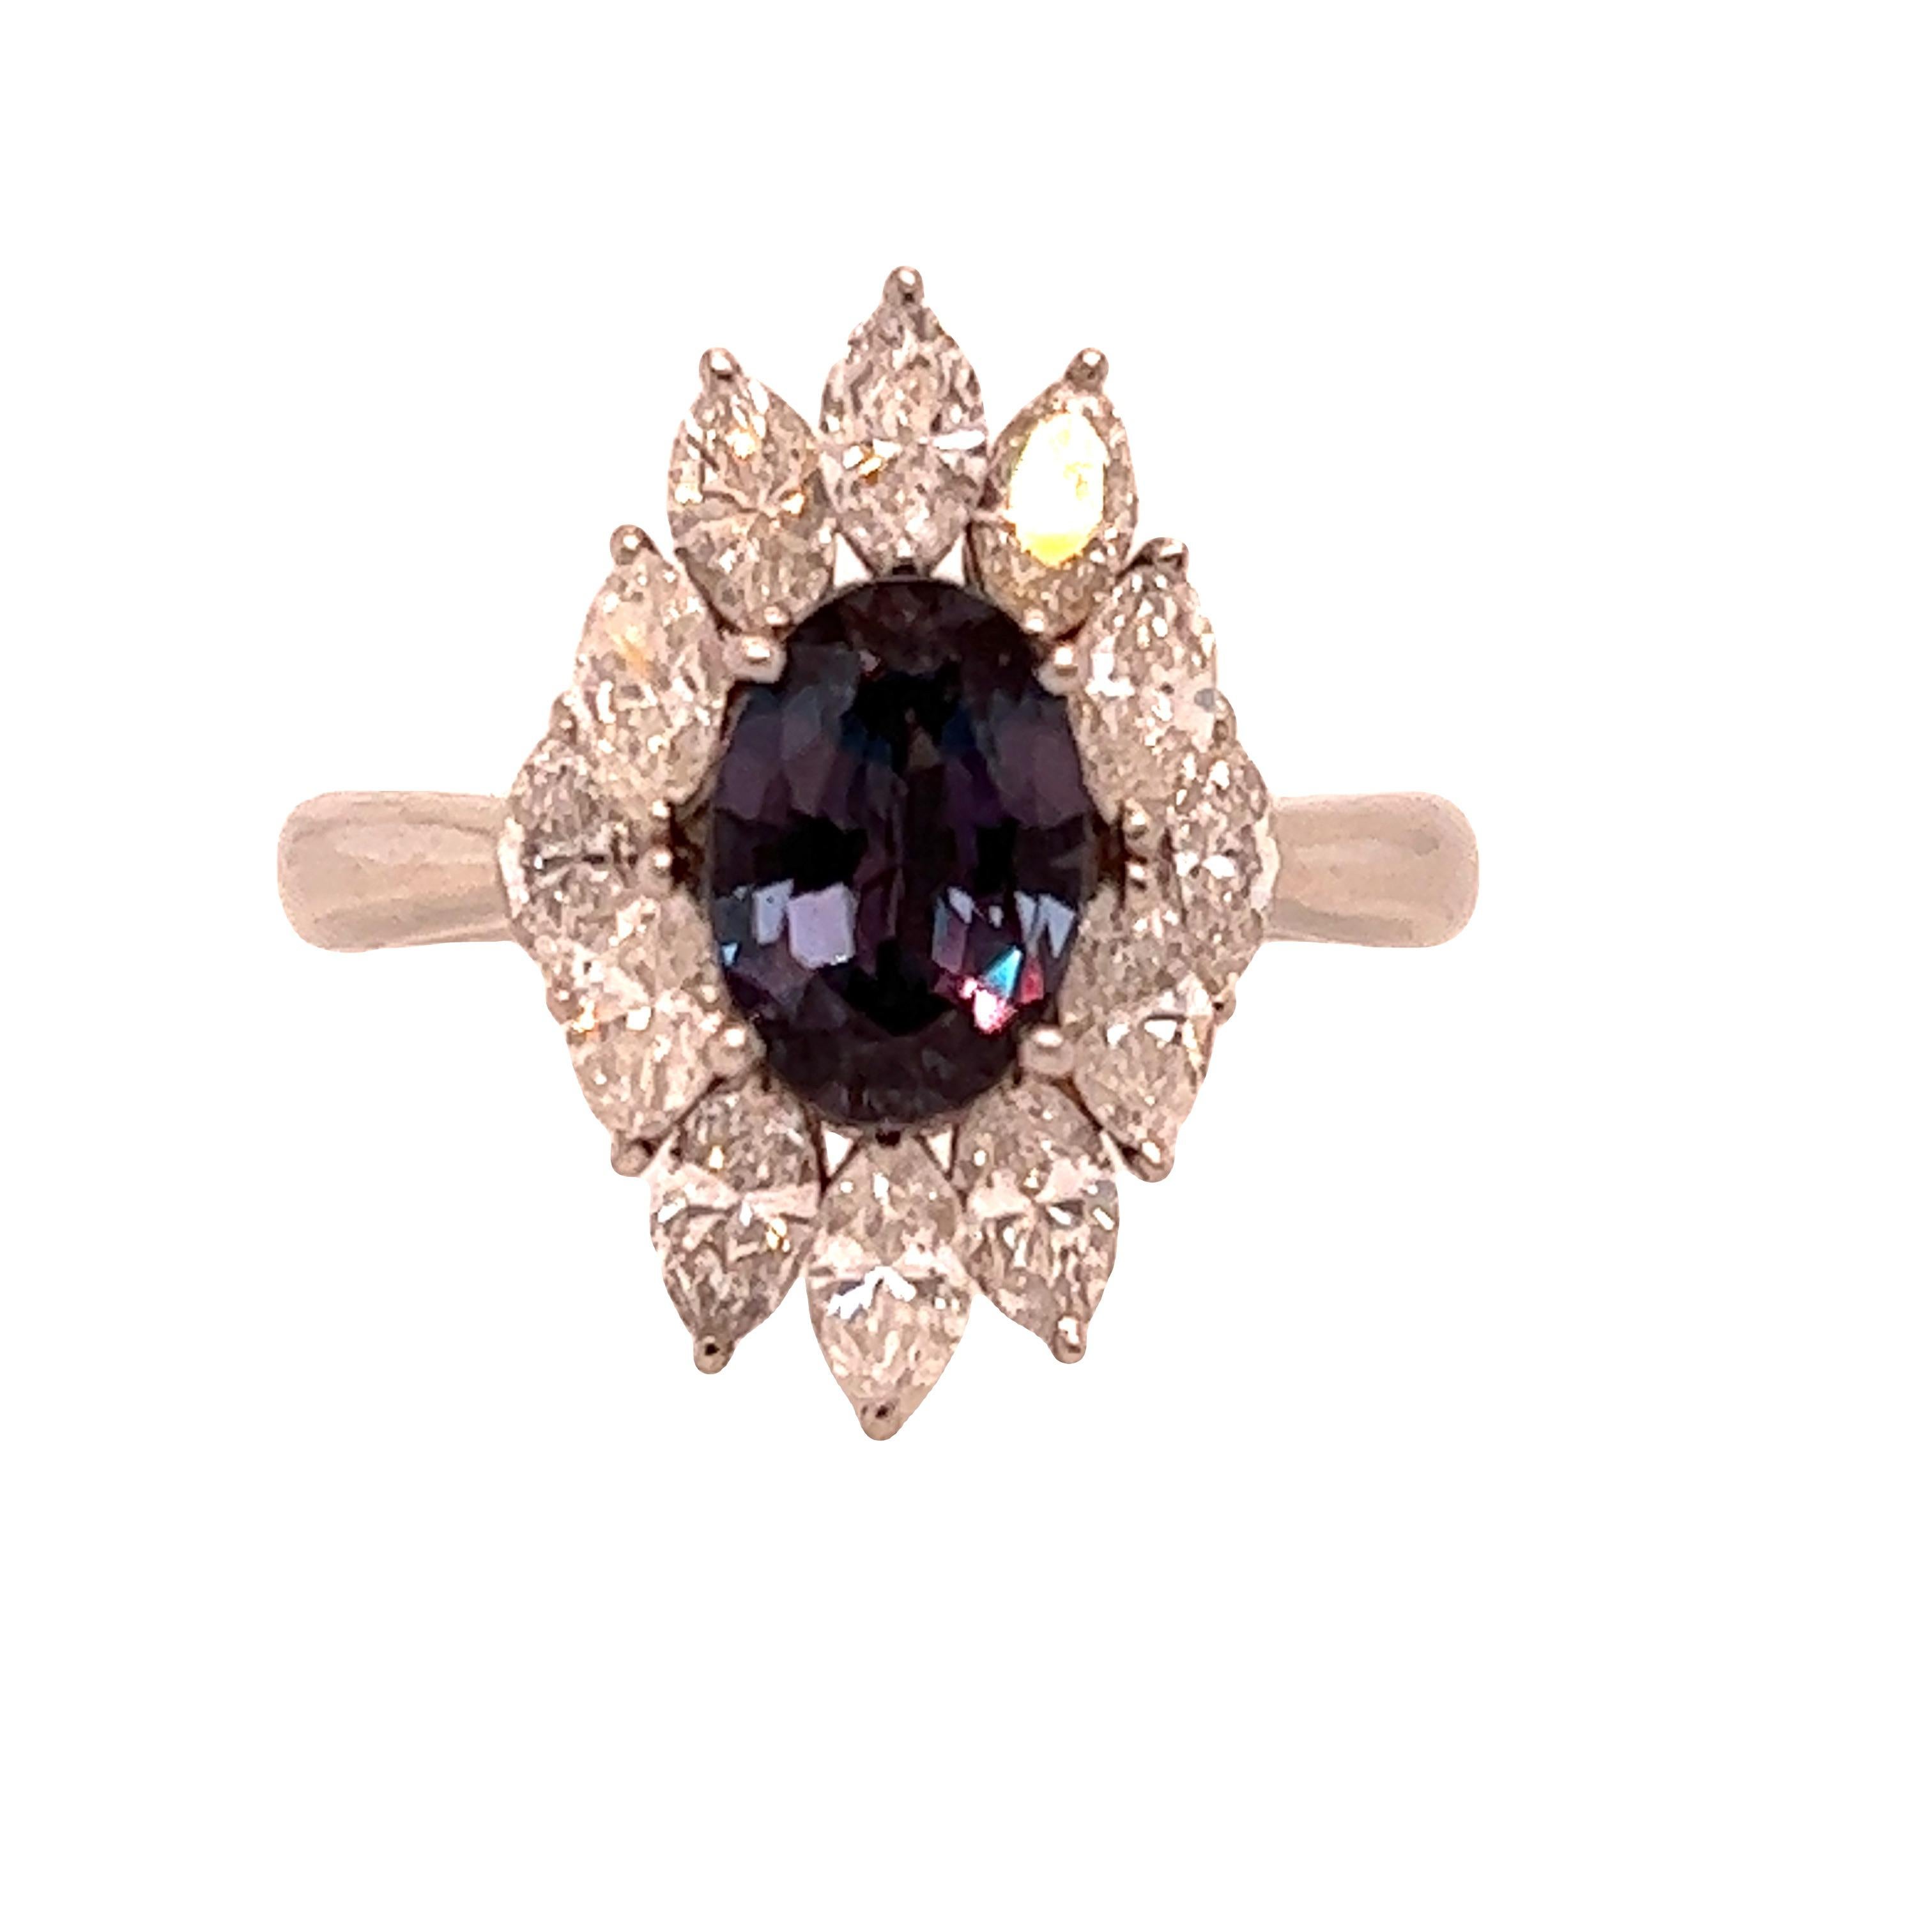 This is a gorgeous natural AAA quality oval Alexandrite surrounded by dainty diamonds that is set in a vintage platinum setting. This ring features a natural 1.41 carat oval alexandrite and is surrounded by brilliant white diamonds. The ring is a